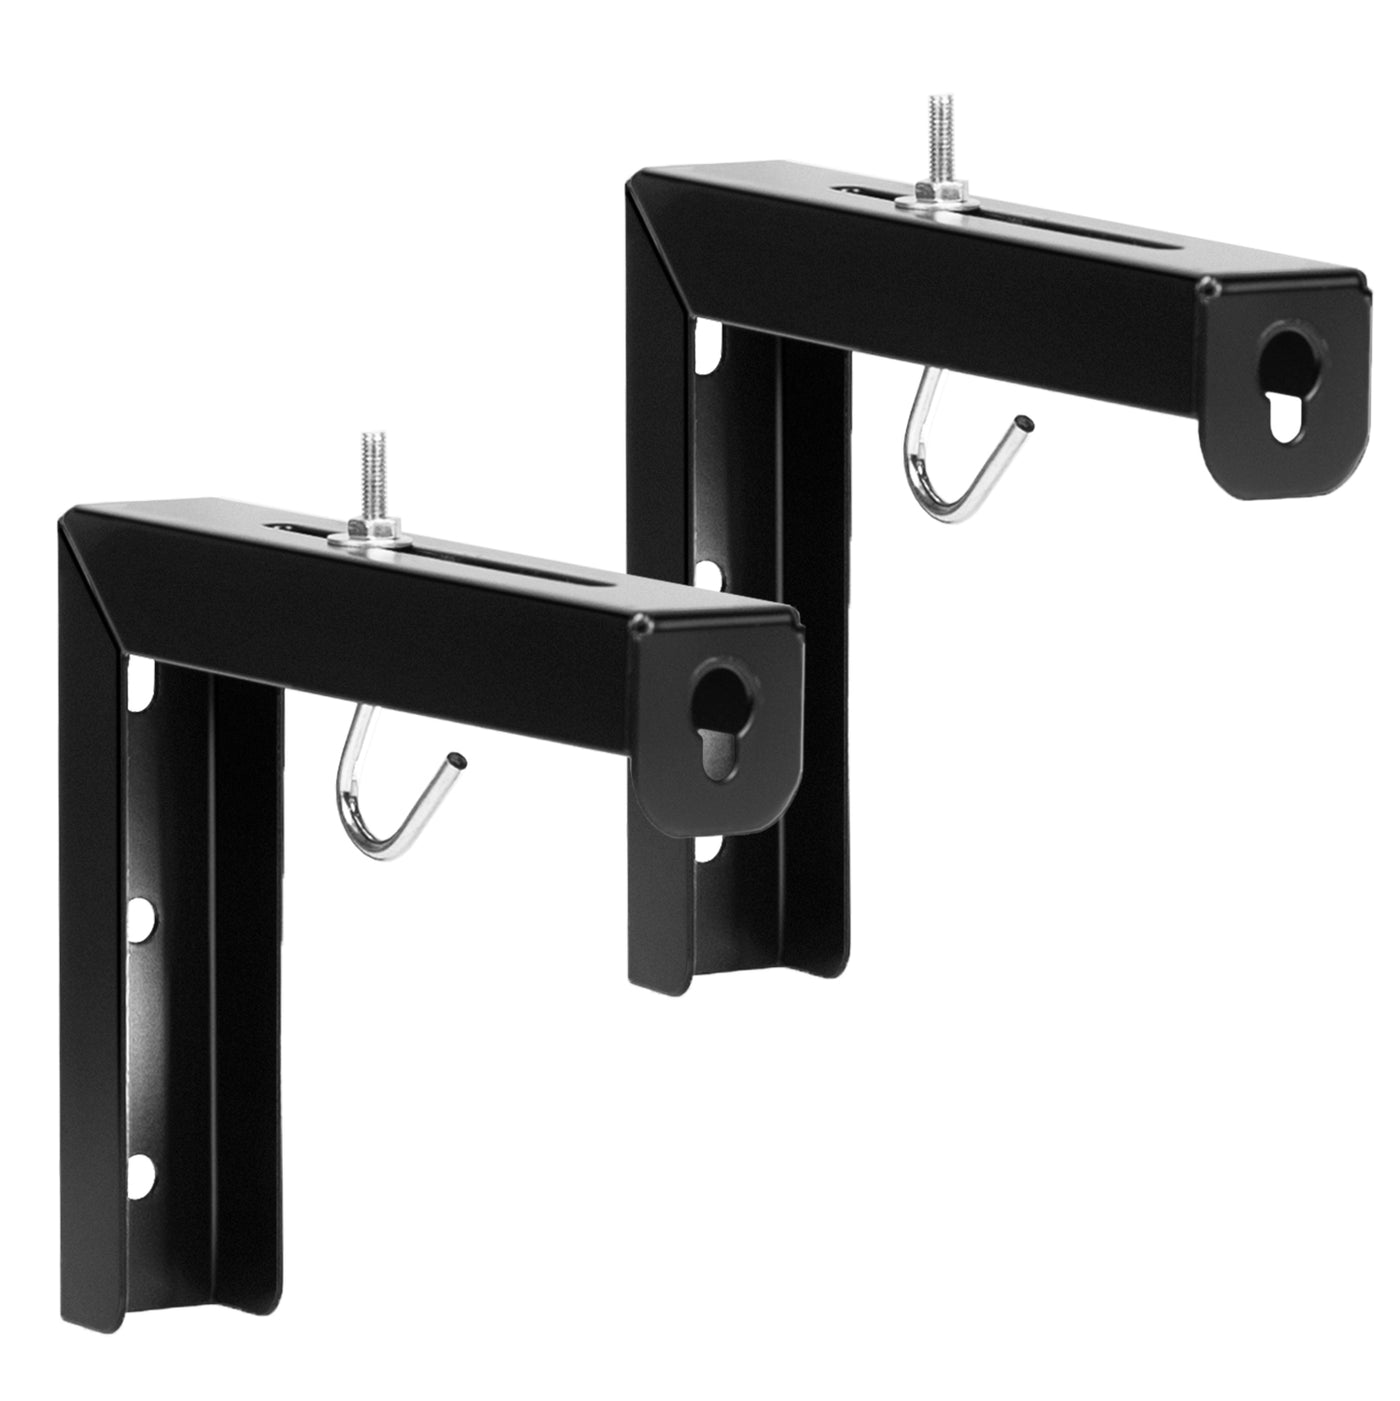 Black L-shaped projector screen mounting brackets.